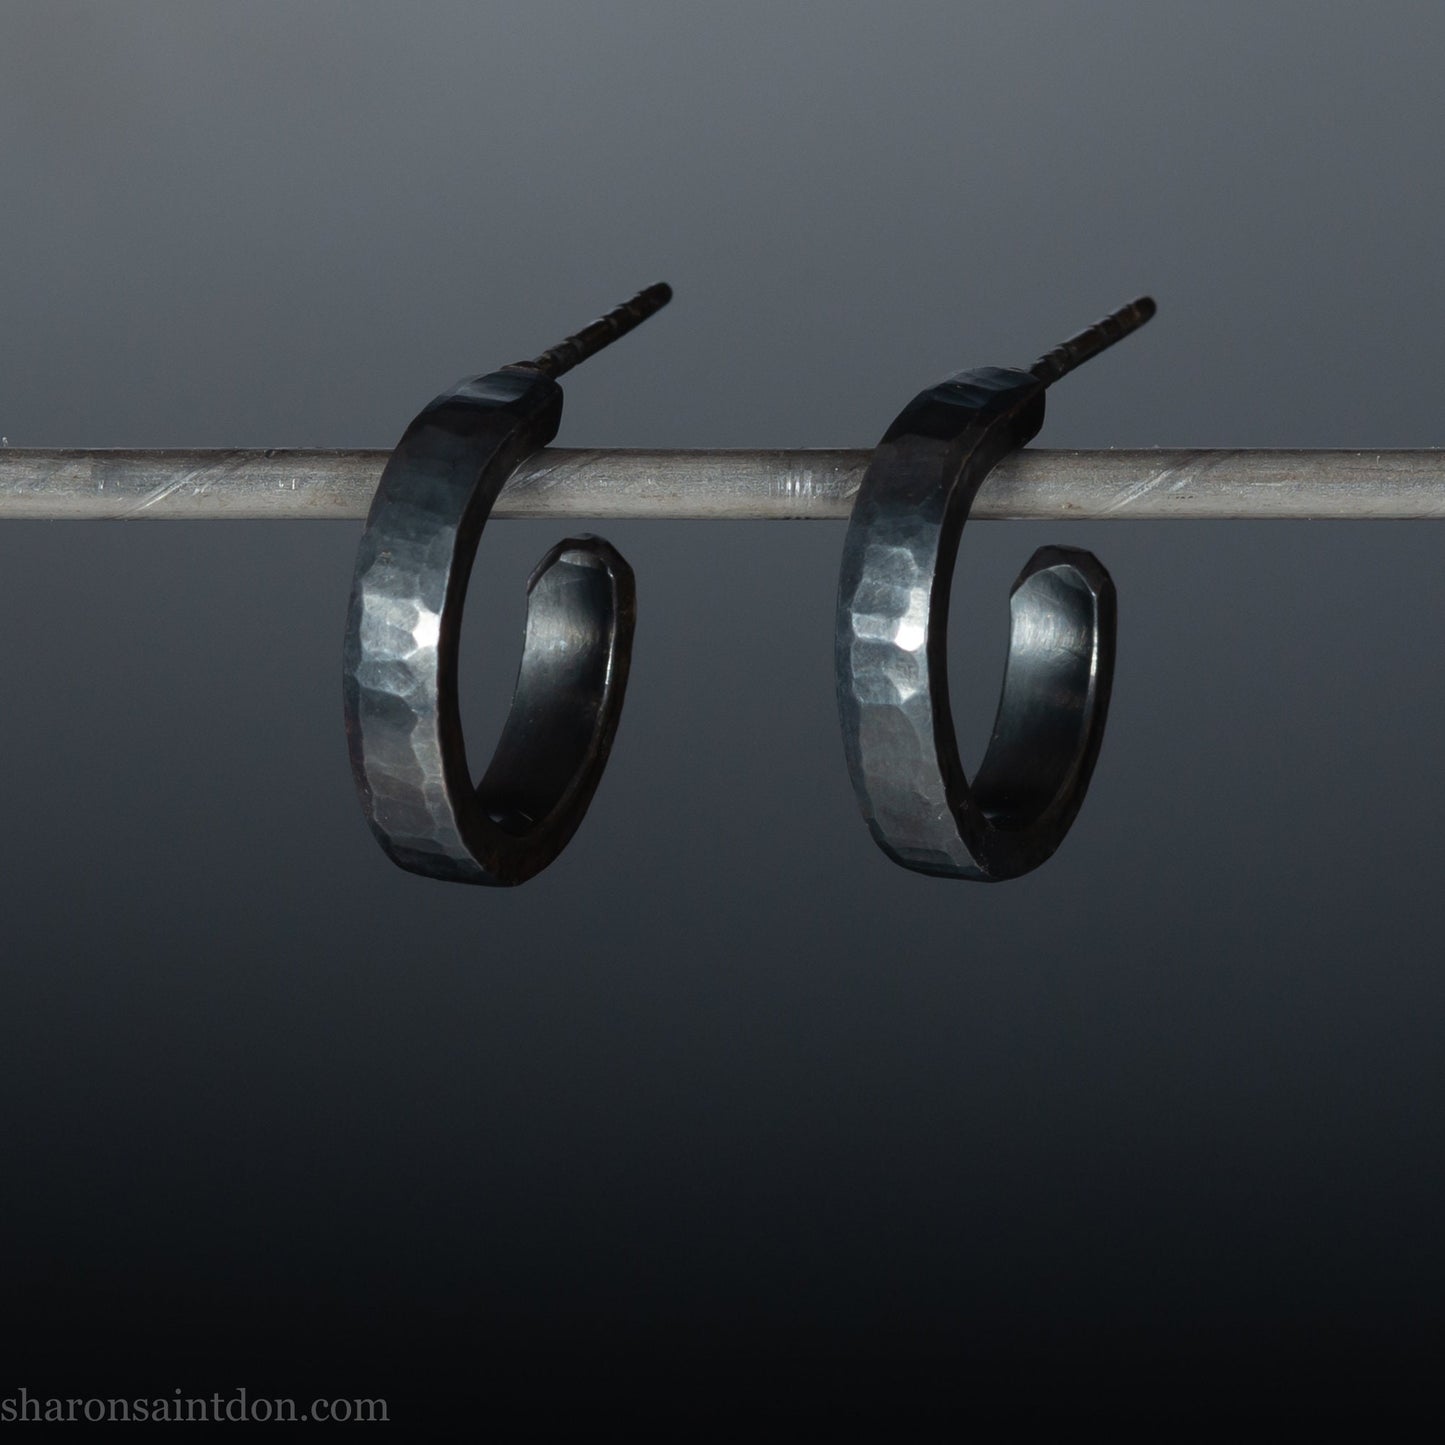 Handmade 925 sterling silver hoop earrings for men or women. 18mm x 3mm, round, oxidized black earrings with hammered texture, made by Sharon SaintDon in North America.